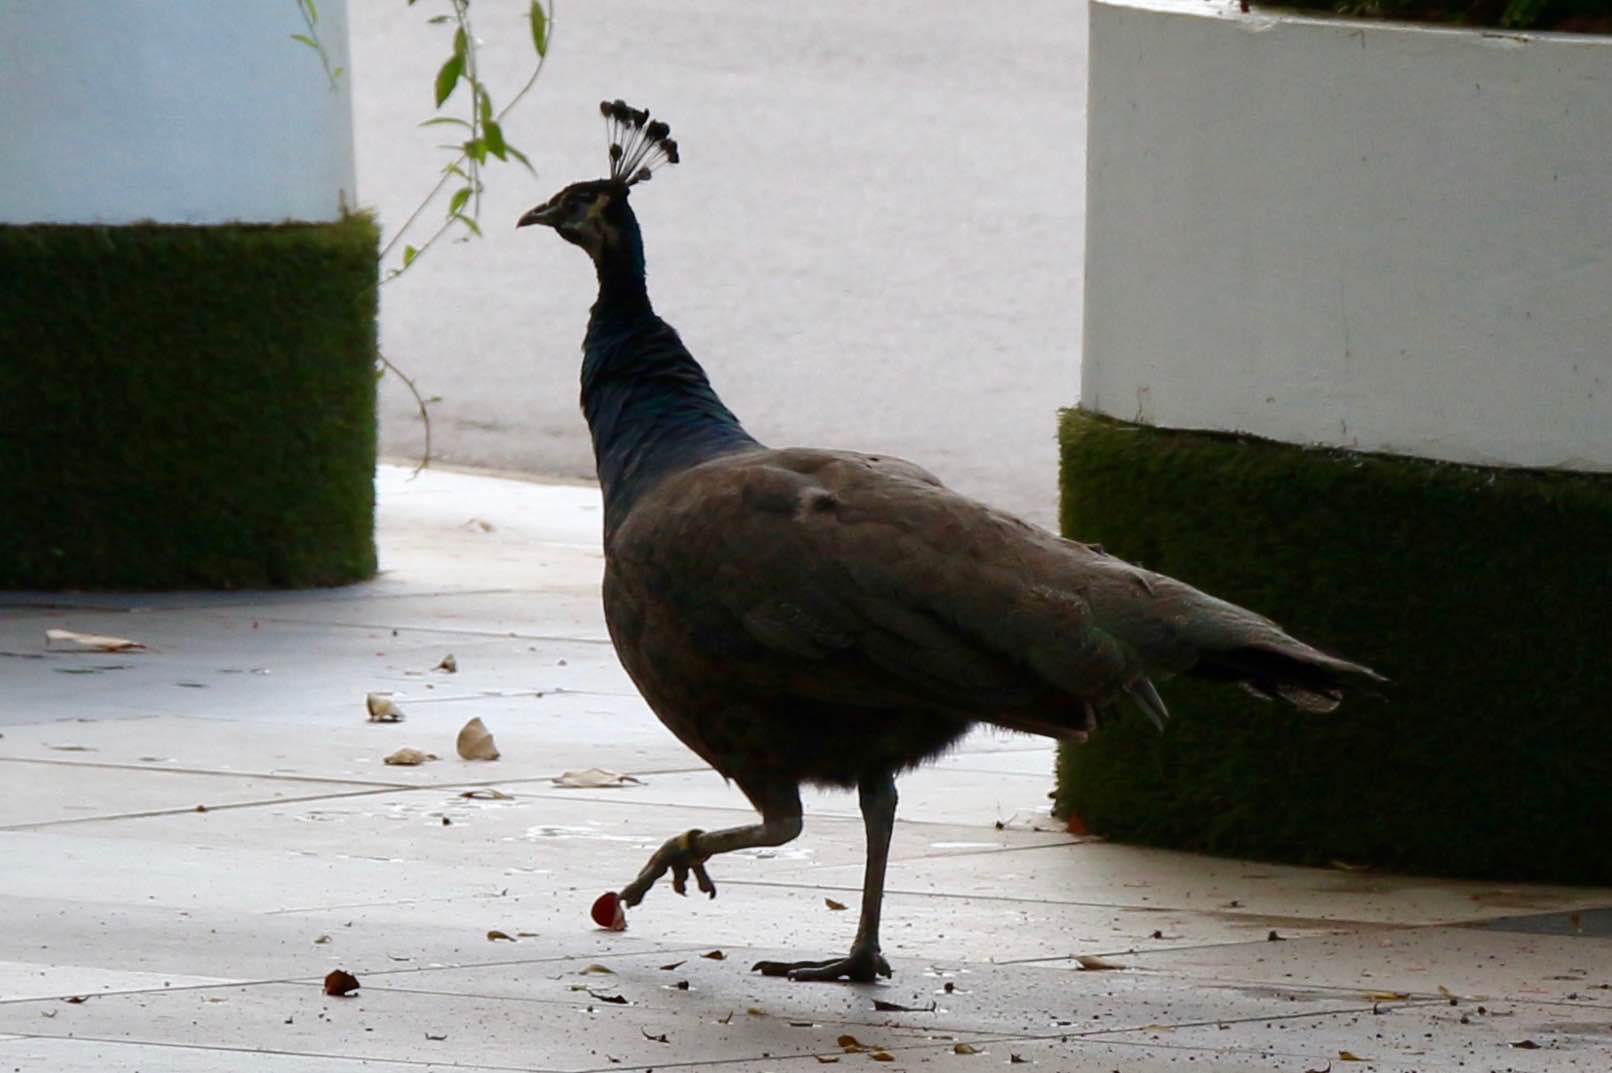 A blue peafowl struts on a sidewalk with its distinctive fan-shaped crest silhouetted against the road. It's probably a female because it doesn't have the impressive, long tail feathers of the male.
